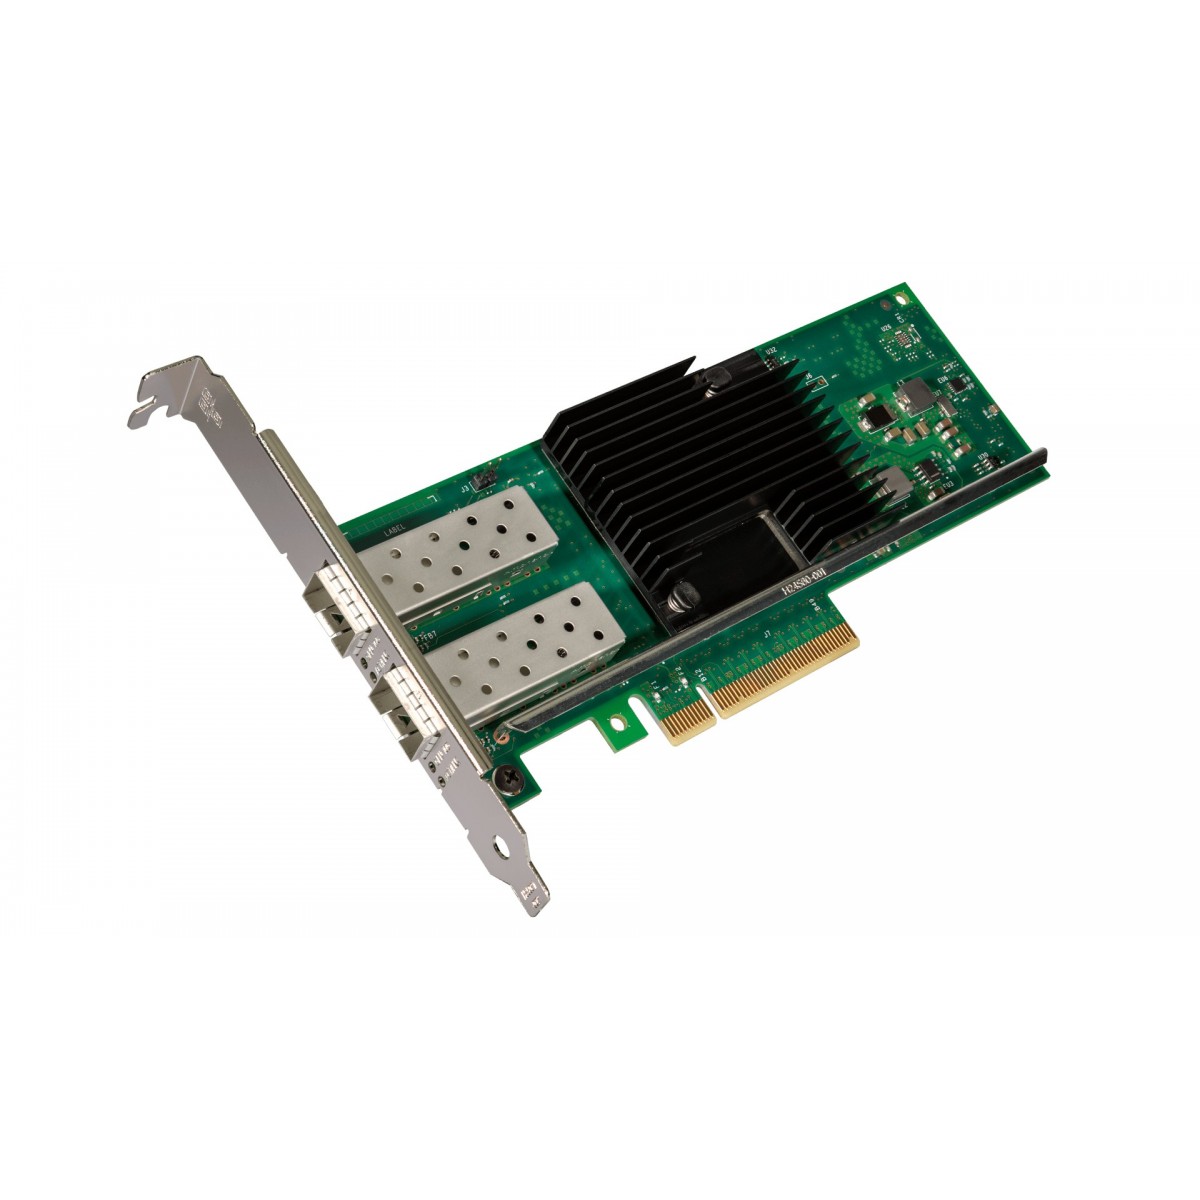 Intel Ethernet Converged Network Adapter X710-DA2, 10GbE/1GbE dual ports SFP+, PCI-E 3.0x8 (Low Profile and Full Height brackets